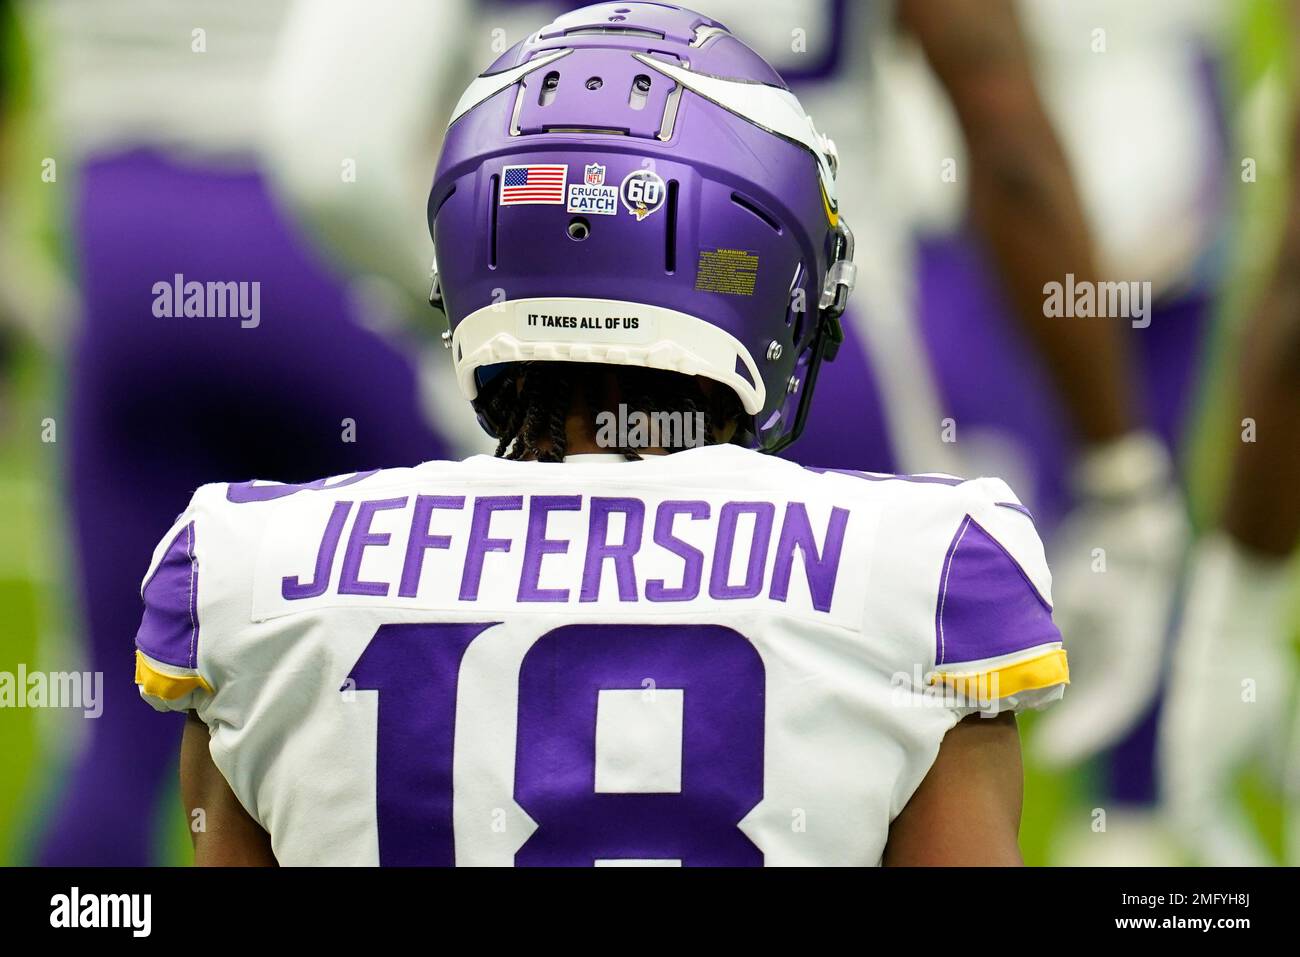 https://c8.alamy.com/comp/2MFYH8J/minnesota-vikings-wide-receiver-justin-jefferson-18-is-seen-from-the-back-during-pregame-warmups-with-the-american-flag-vikings-60-years-logo-nfl-cancer-awareness-logo-and-the-it-takes-all-of-us-slogan-before-an-nfl-football-game-against-the-houston-texans-sunday-oct-4-2020-in-houston-ap-photomatt-patterson-2MFYH8J.jpg